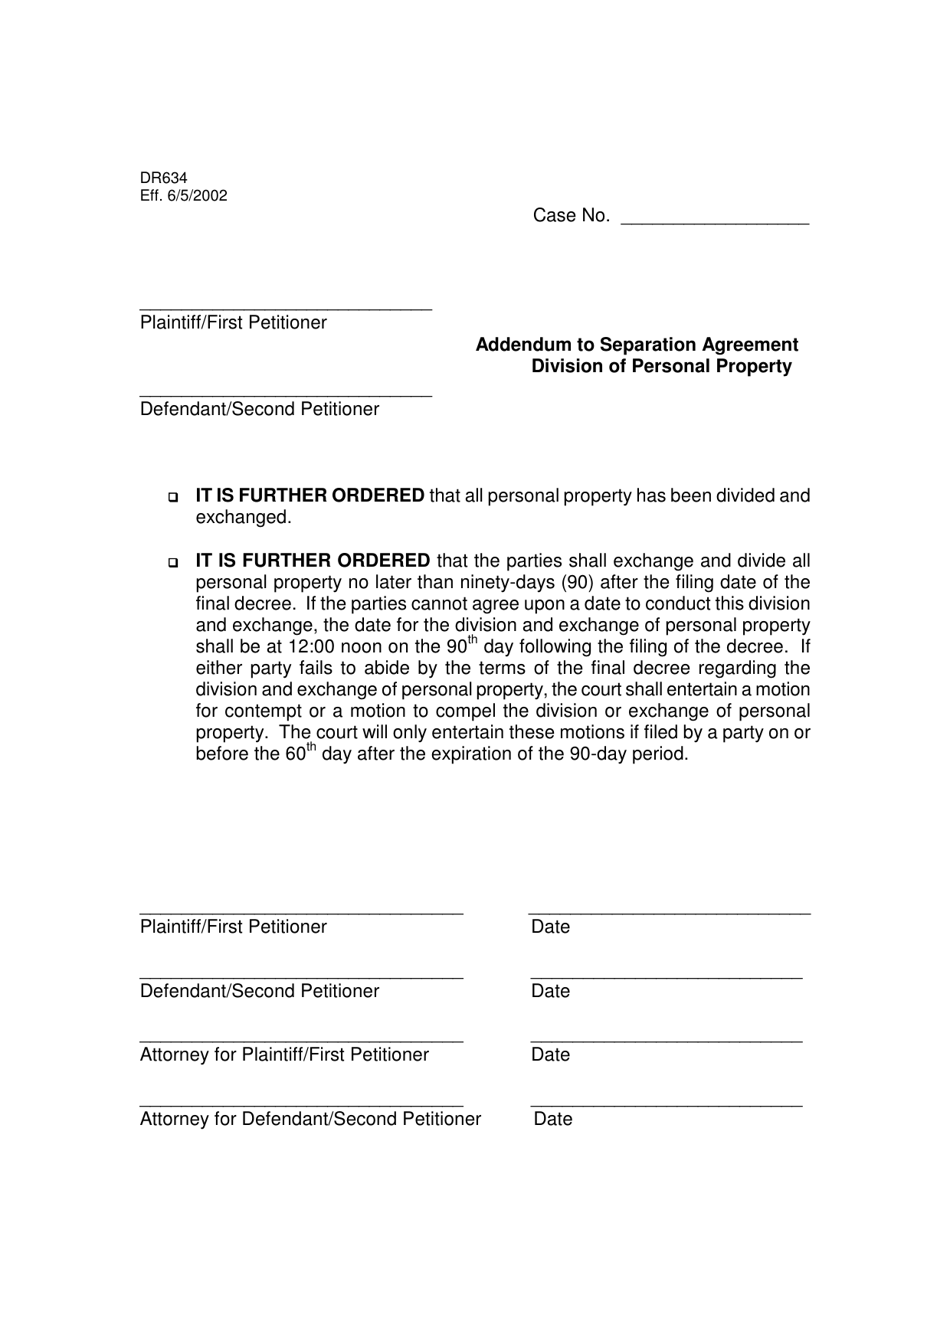 Form DR634 Addendum to Separation Agreement - Division of Personal Property - Butler County, Ohio, Page 1